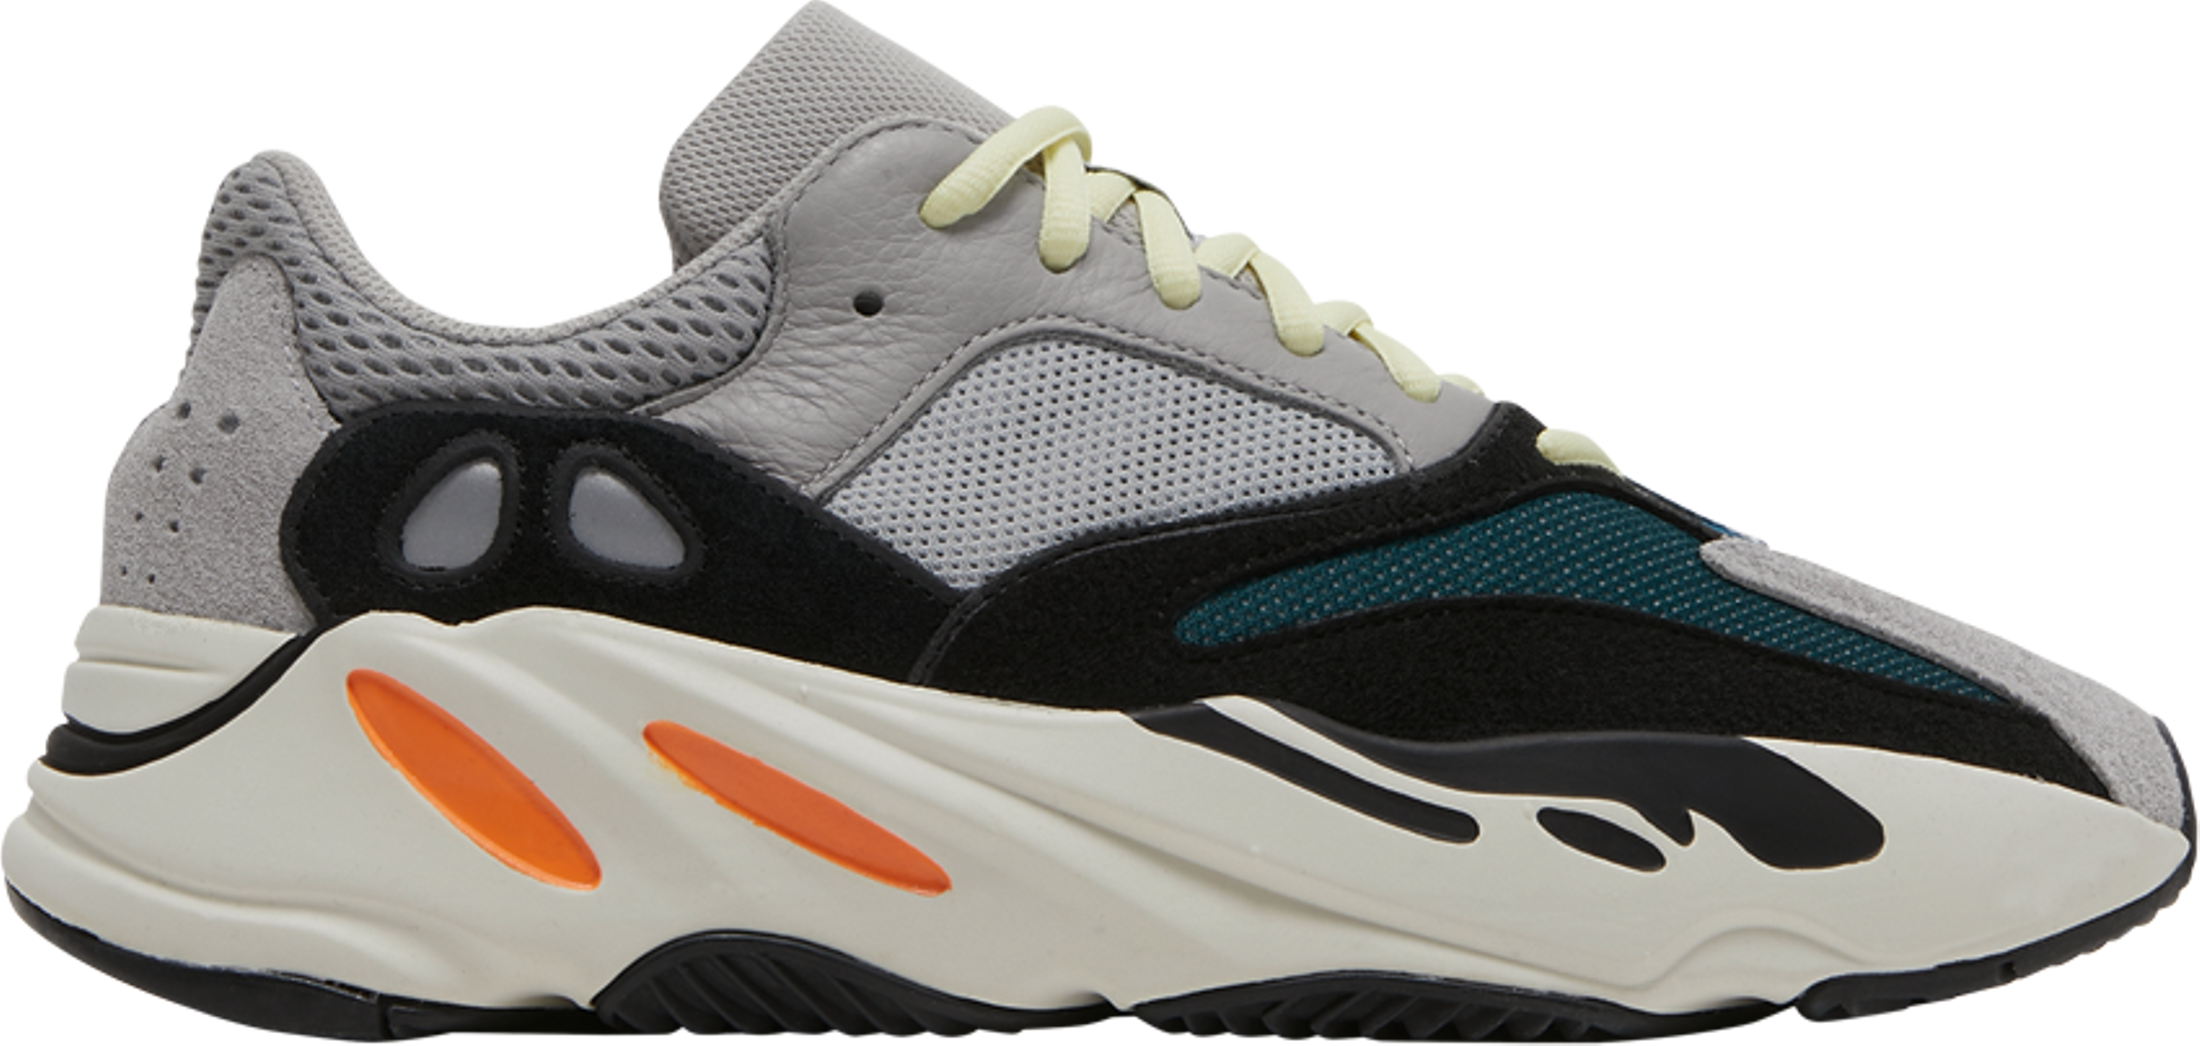 udarbejde Higgins Persona Yeezy Boost 700 'Wave Runner' sneakers for sale at Urban Necessities.